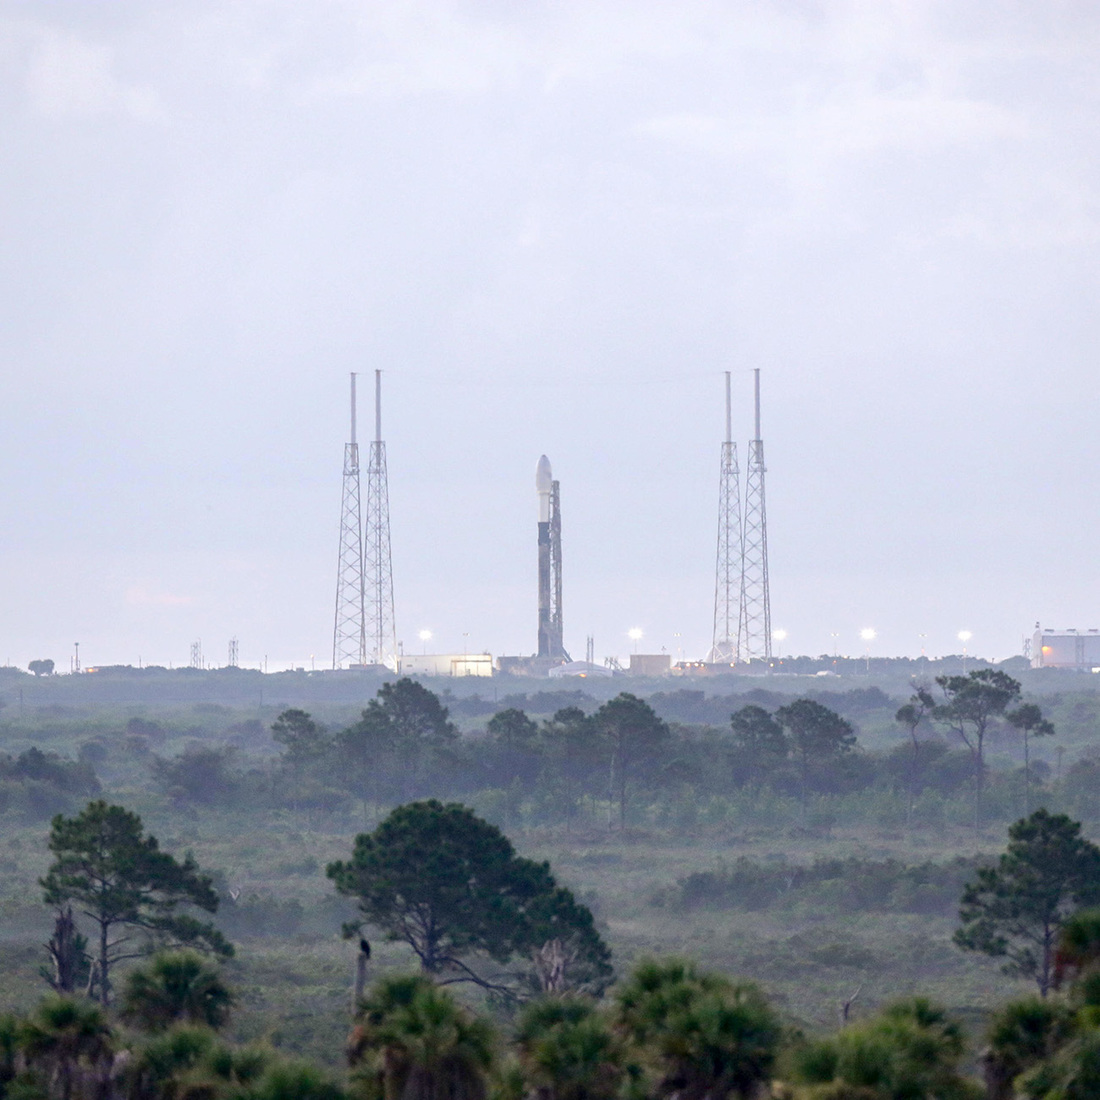 Image of the SpaceX Flacon 9 rocket and KPLO payload on the SLC-40 launch pad ready for fueling.